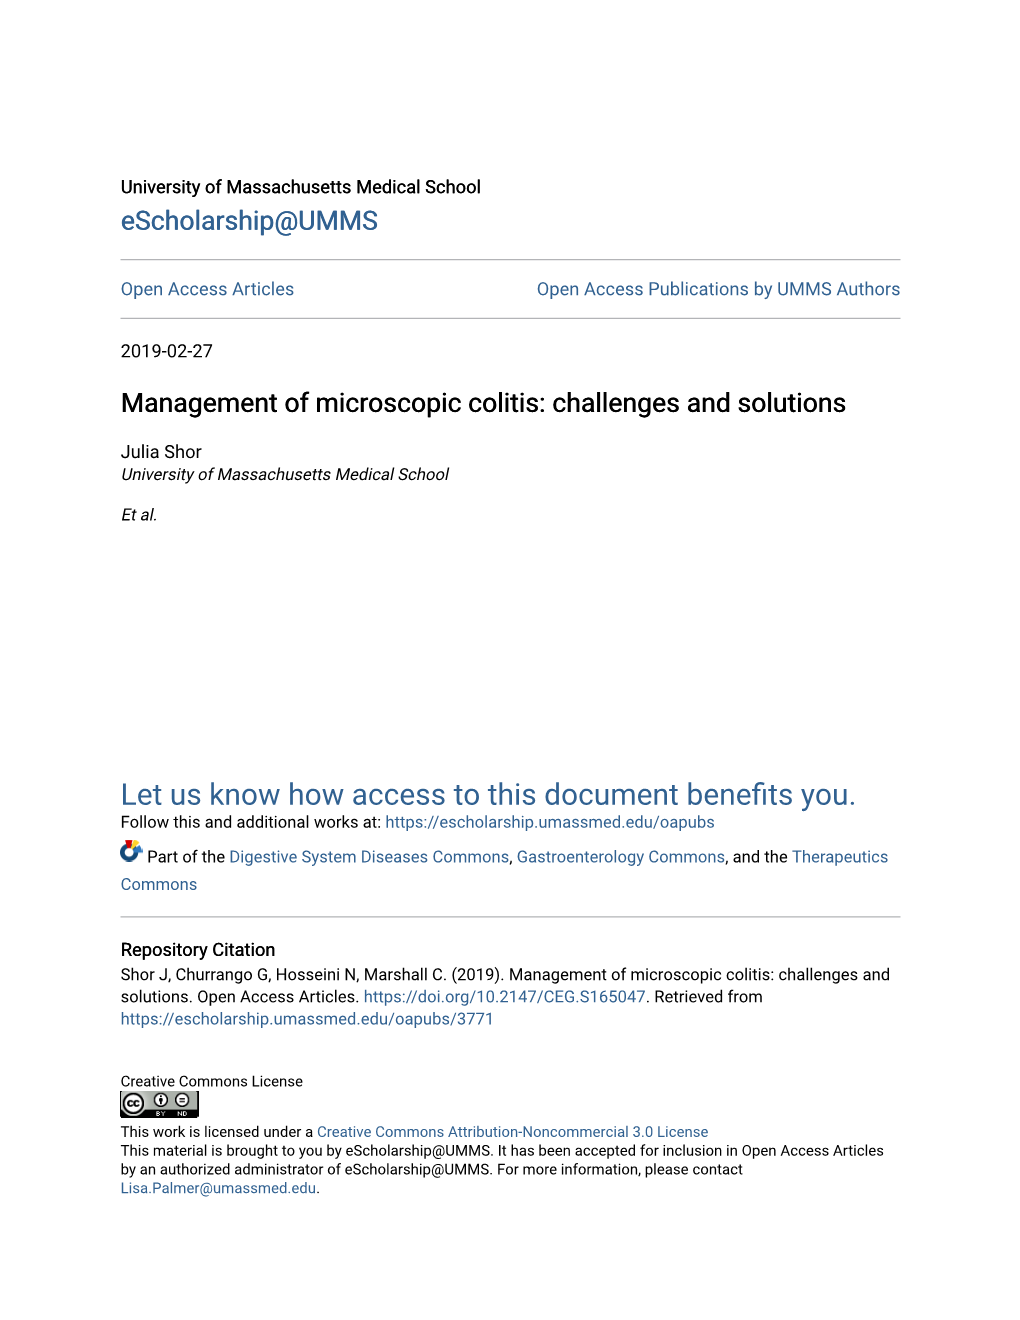 Management of Microscopic Colitis: Challenges and Solutions